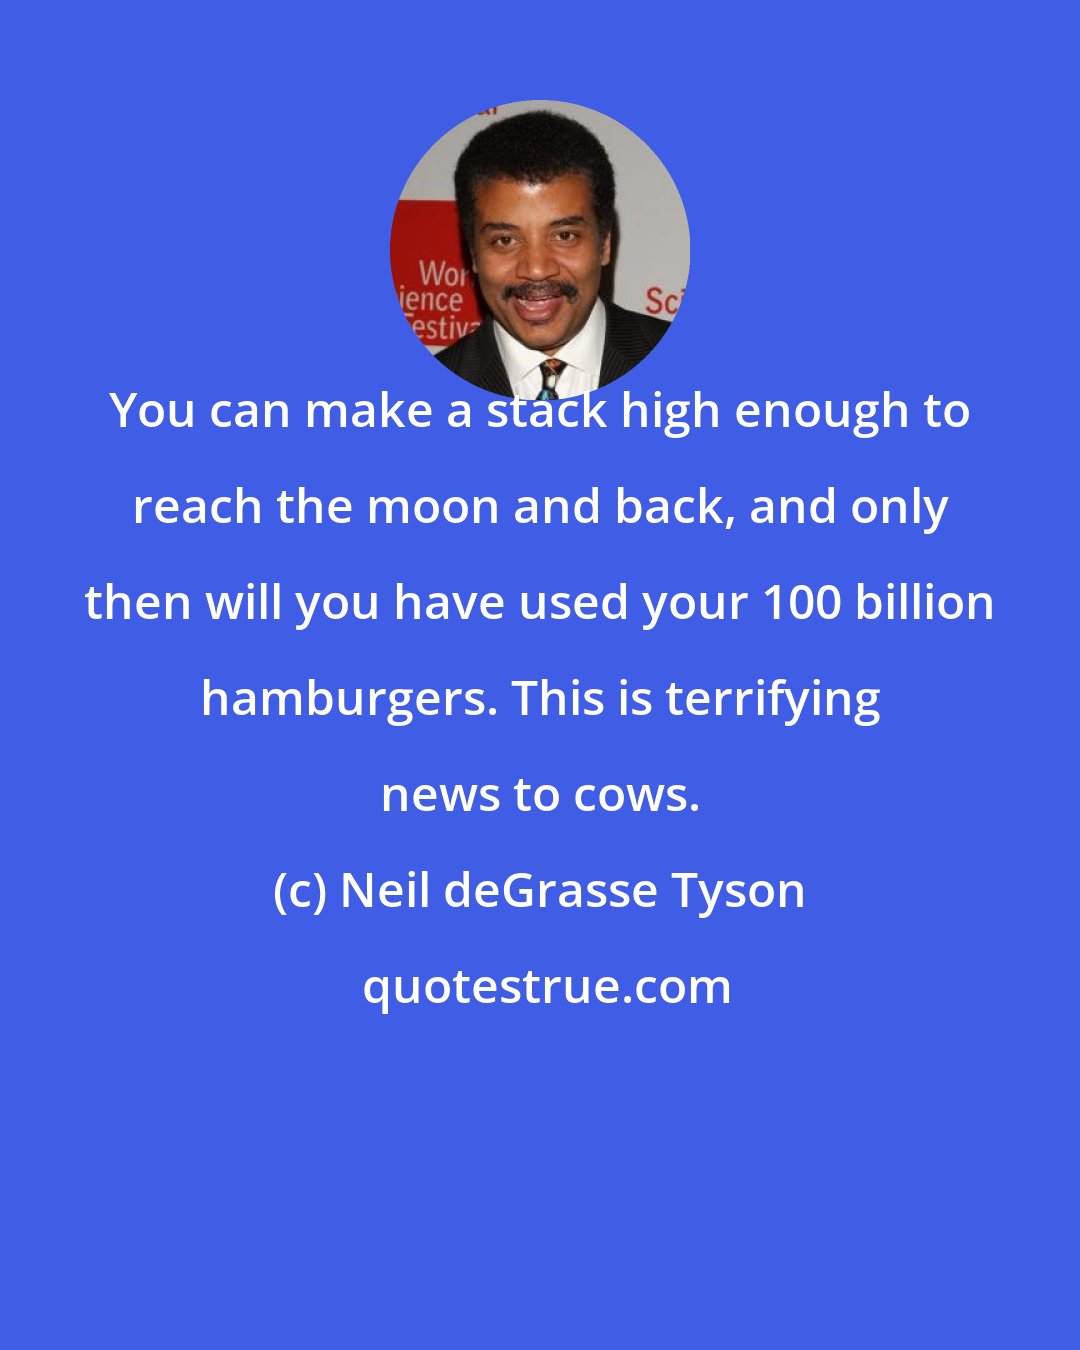 Neil deGrasse Tyson: You can make a stack high enough to reach the moon and back, and only then will you have used your 100 billion hamburgers. This is terrifying news to cows.